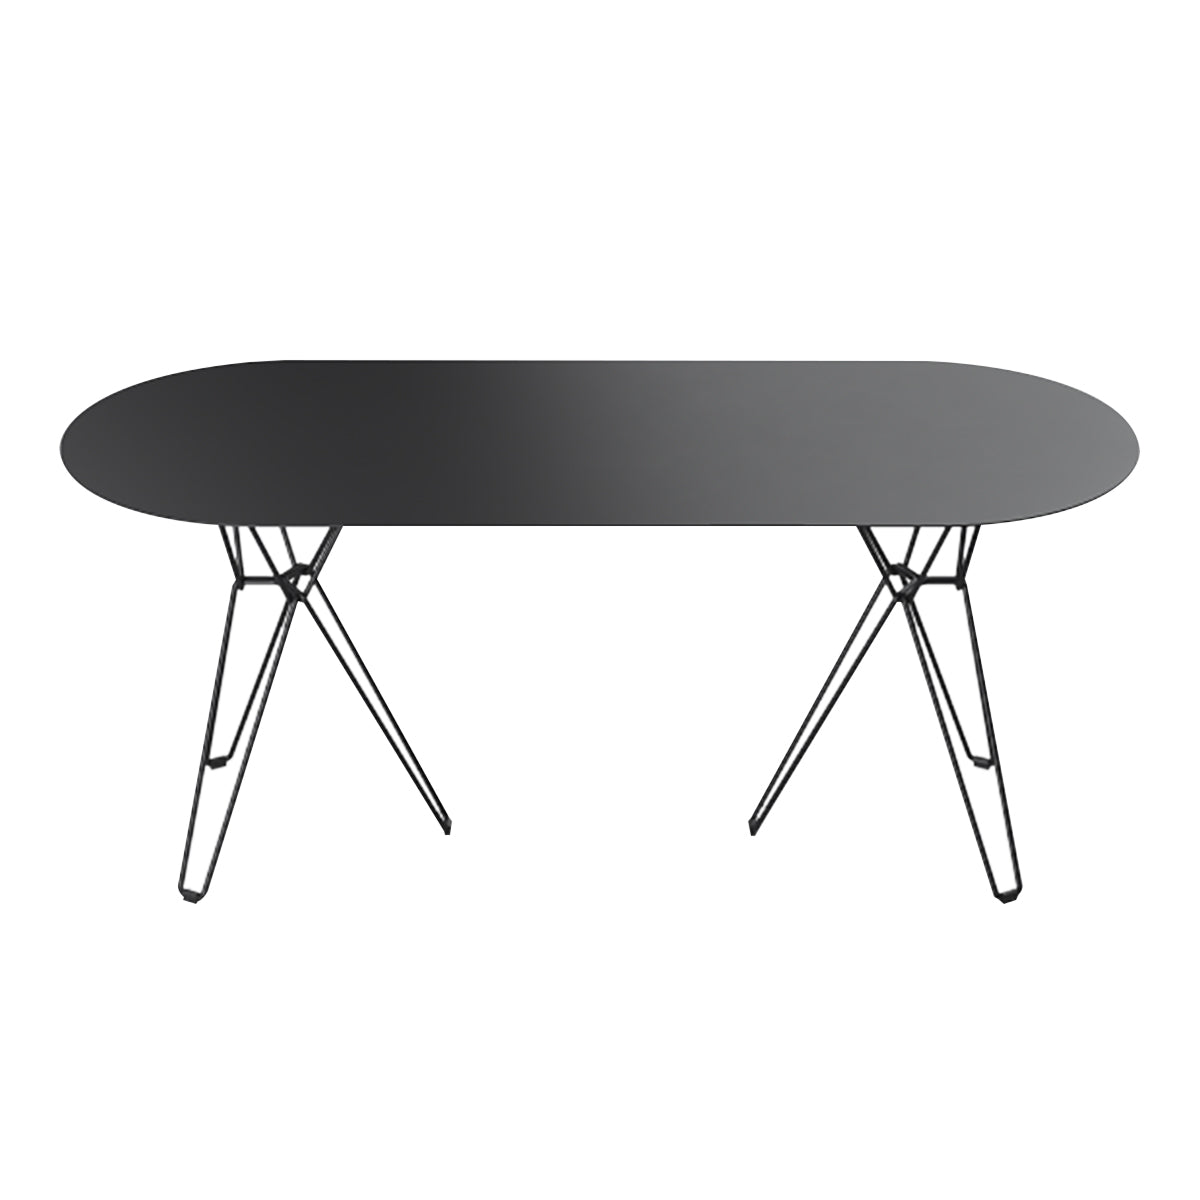 Tio Oval Dining Table: Black